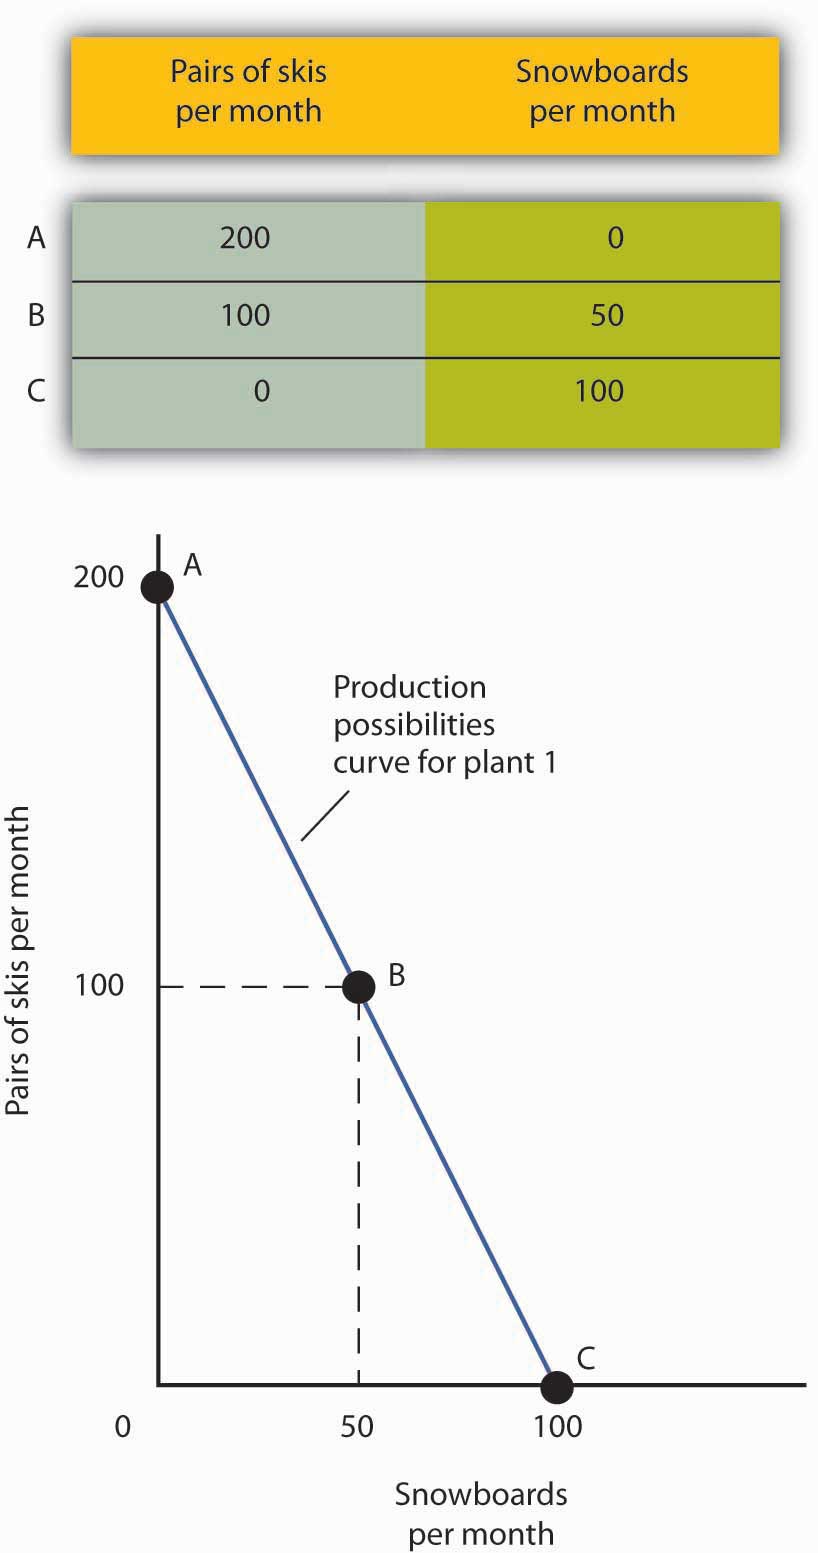 production possibilities curve